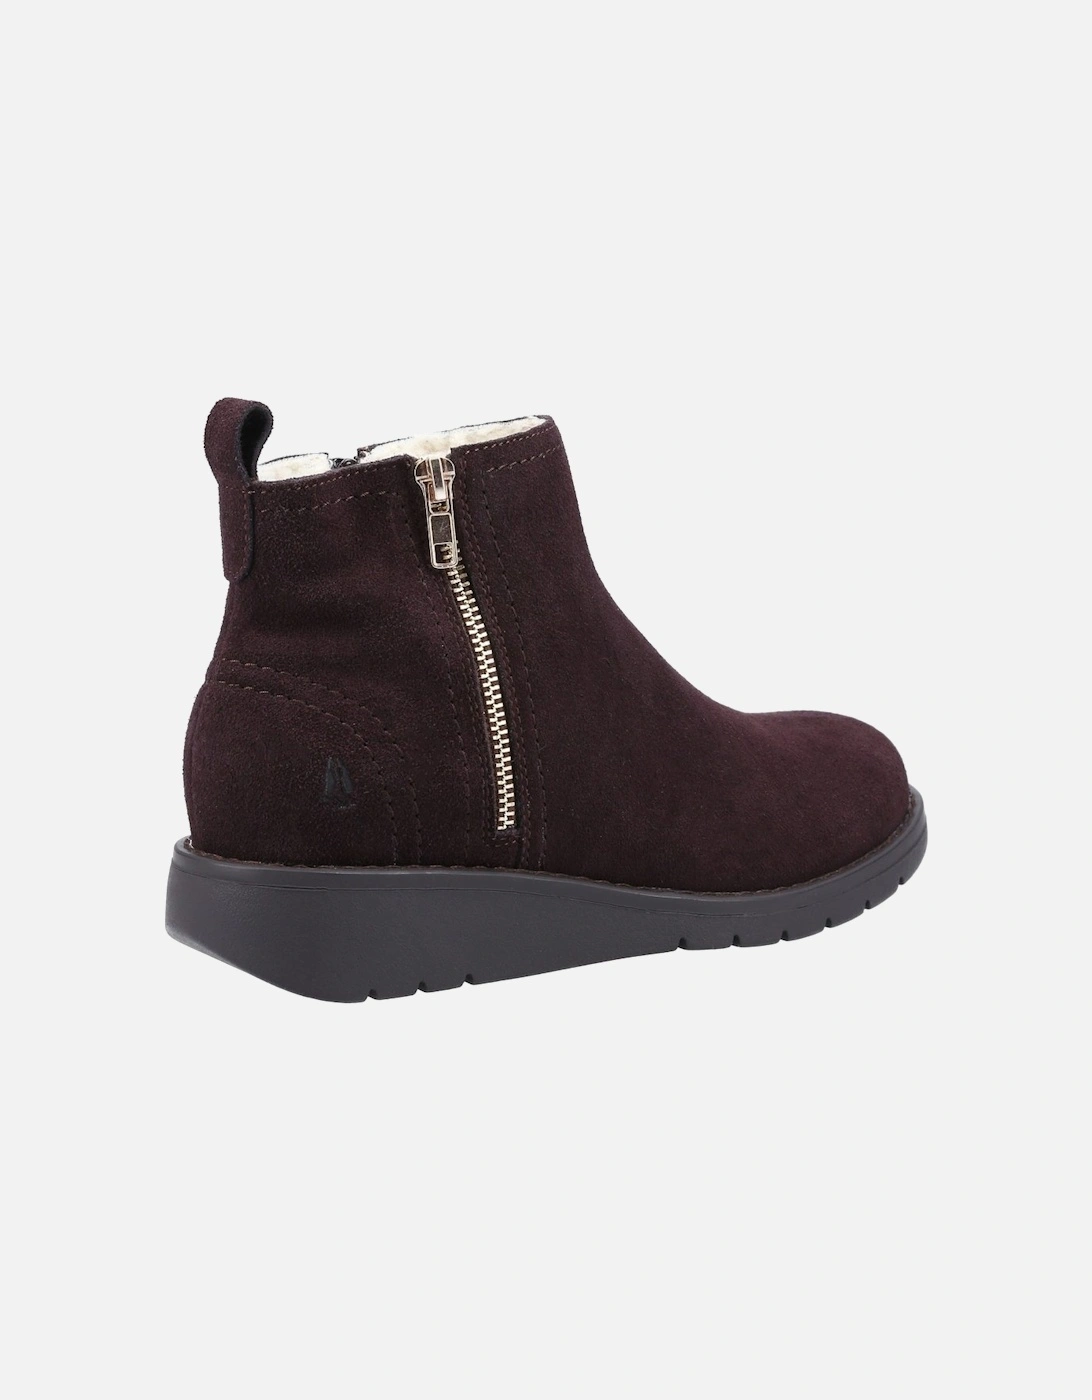 Libby Womens Ankle Boots